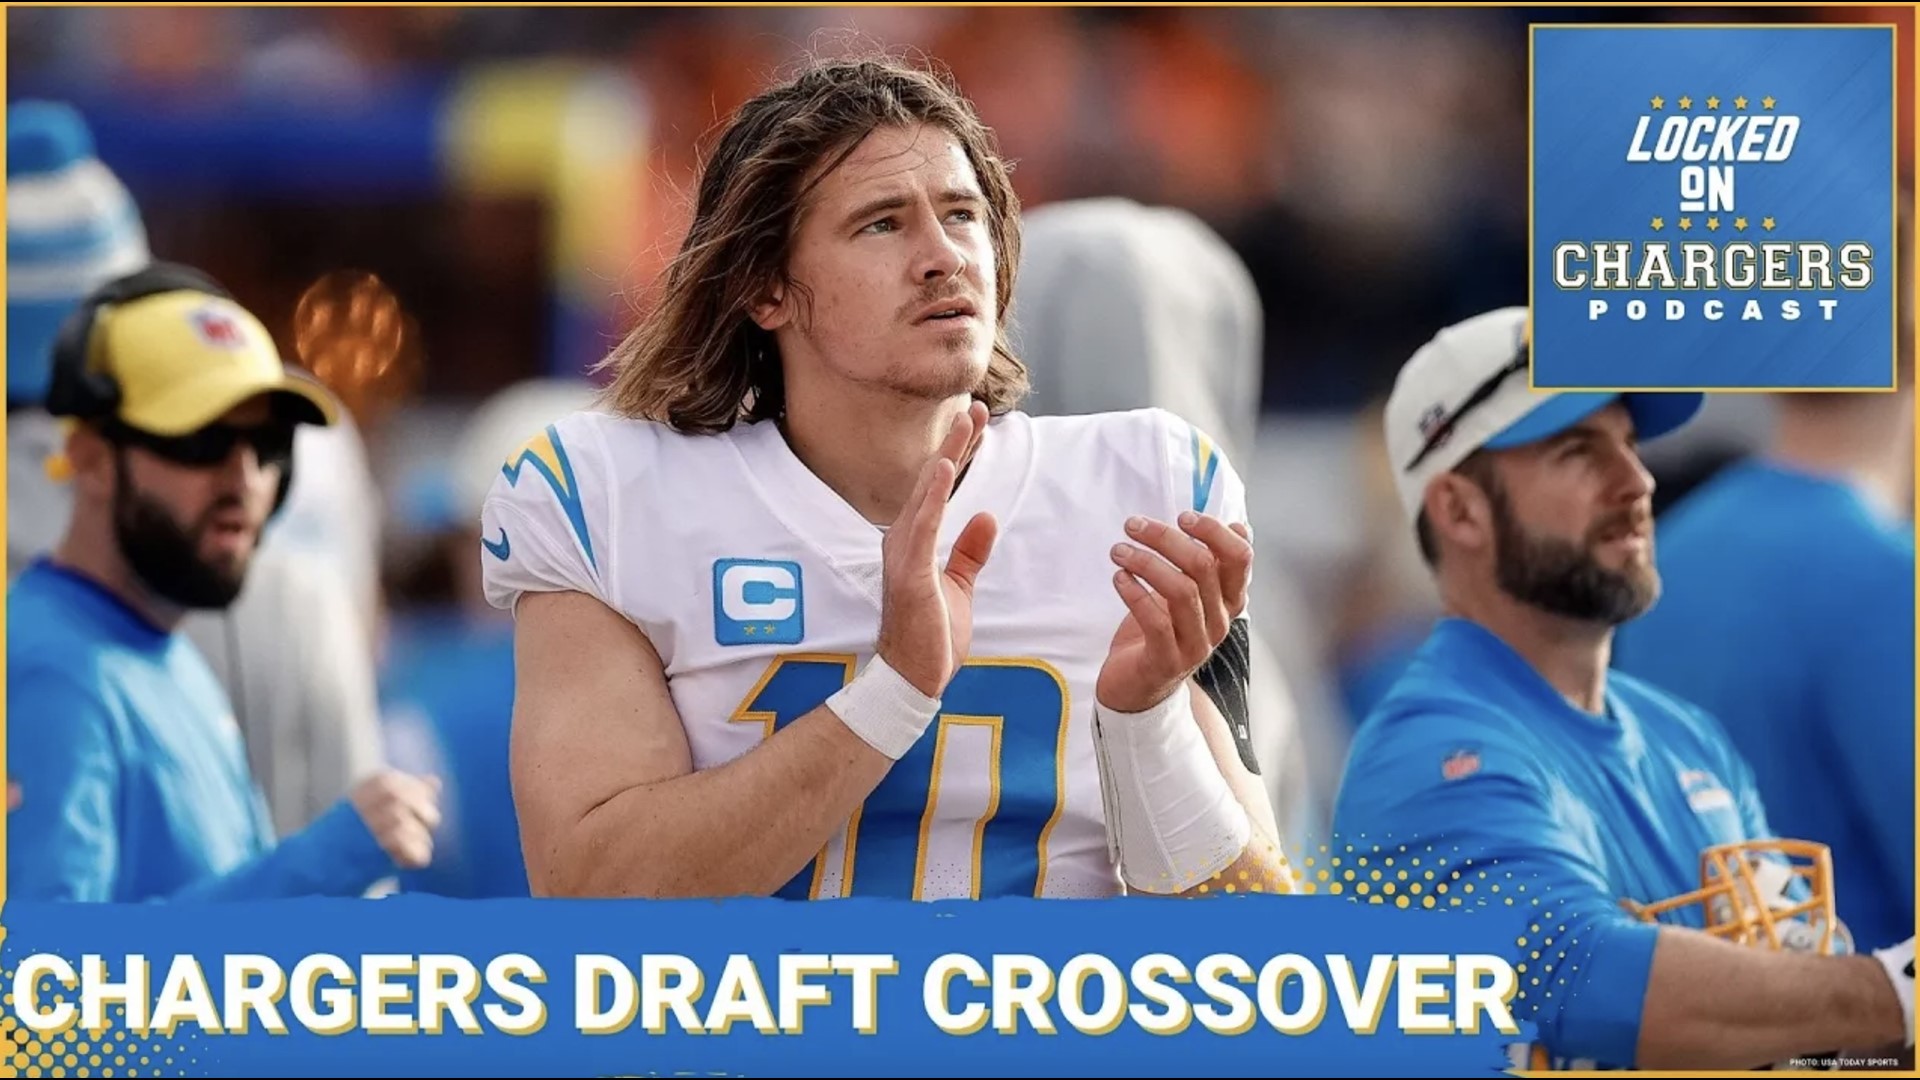 chargers draft